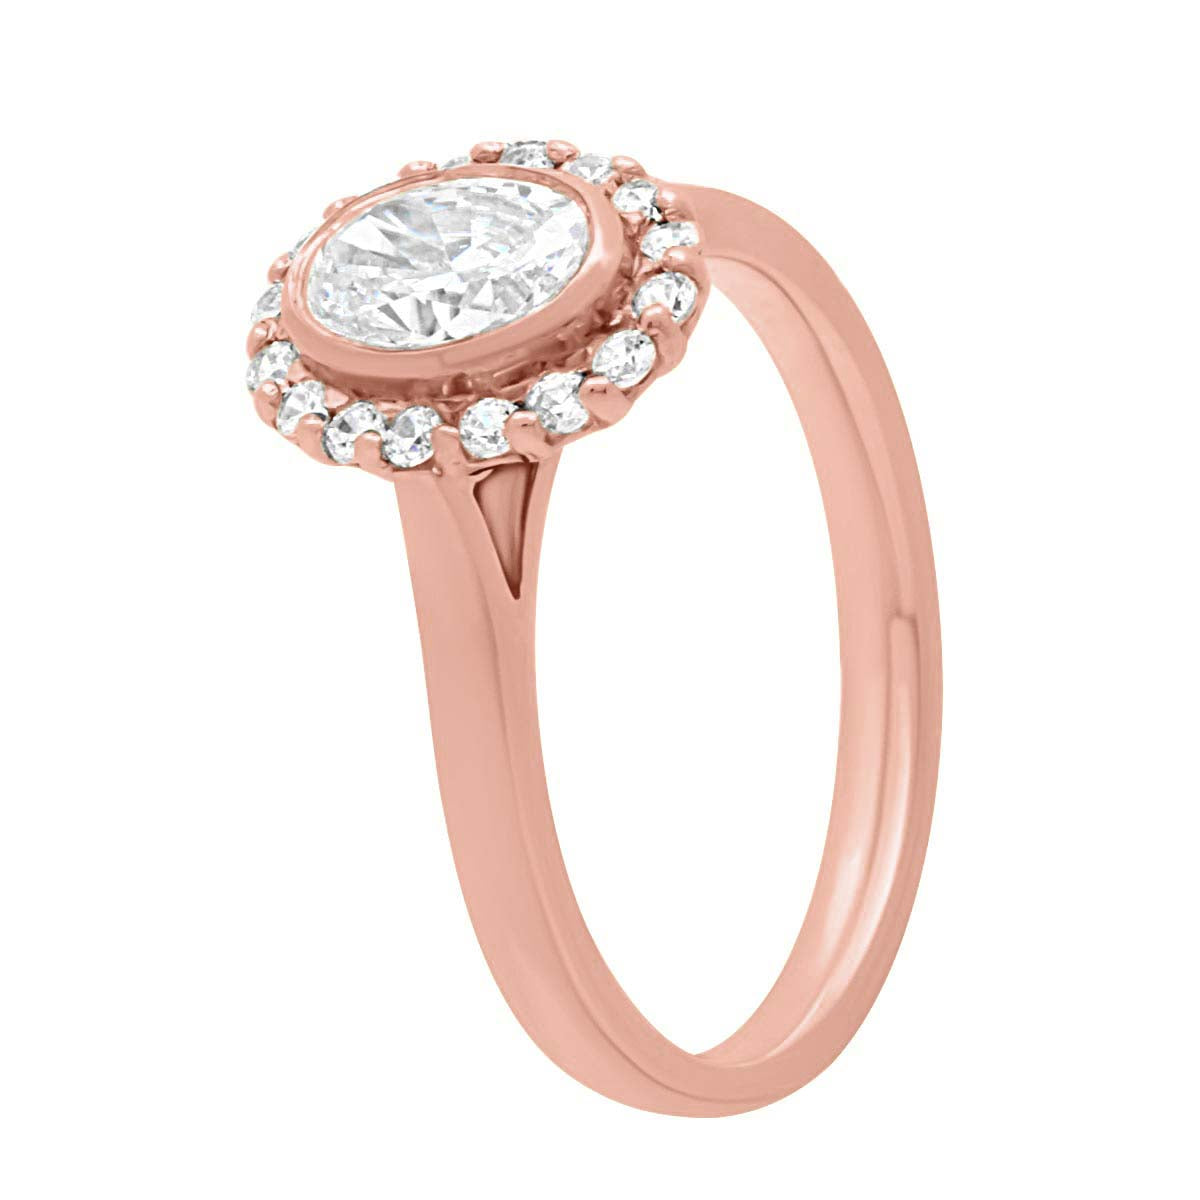  Oval Halo Diamond Ring in rose gold in angled position